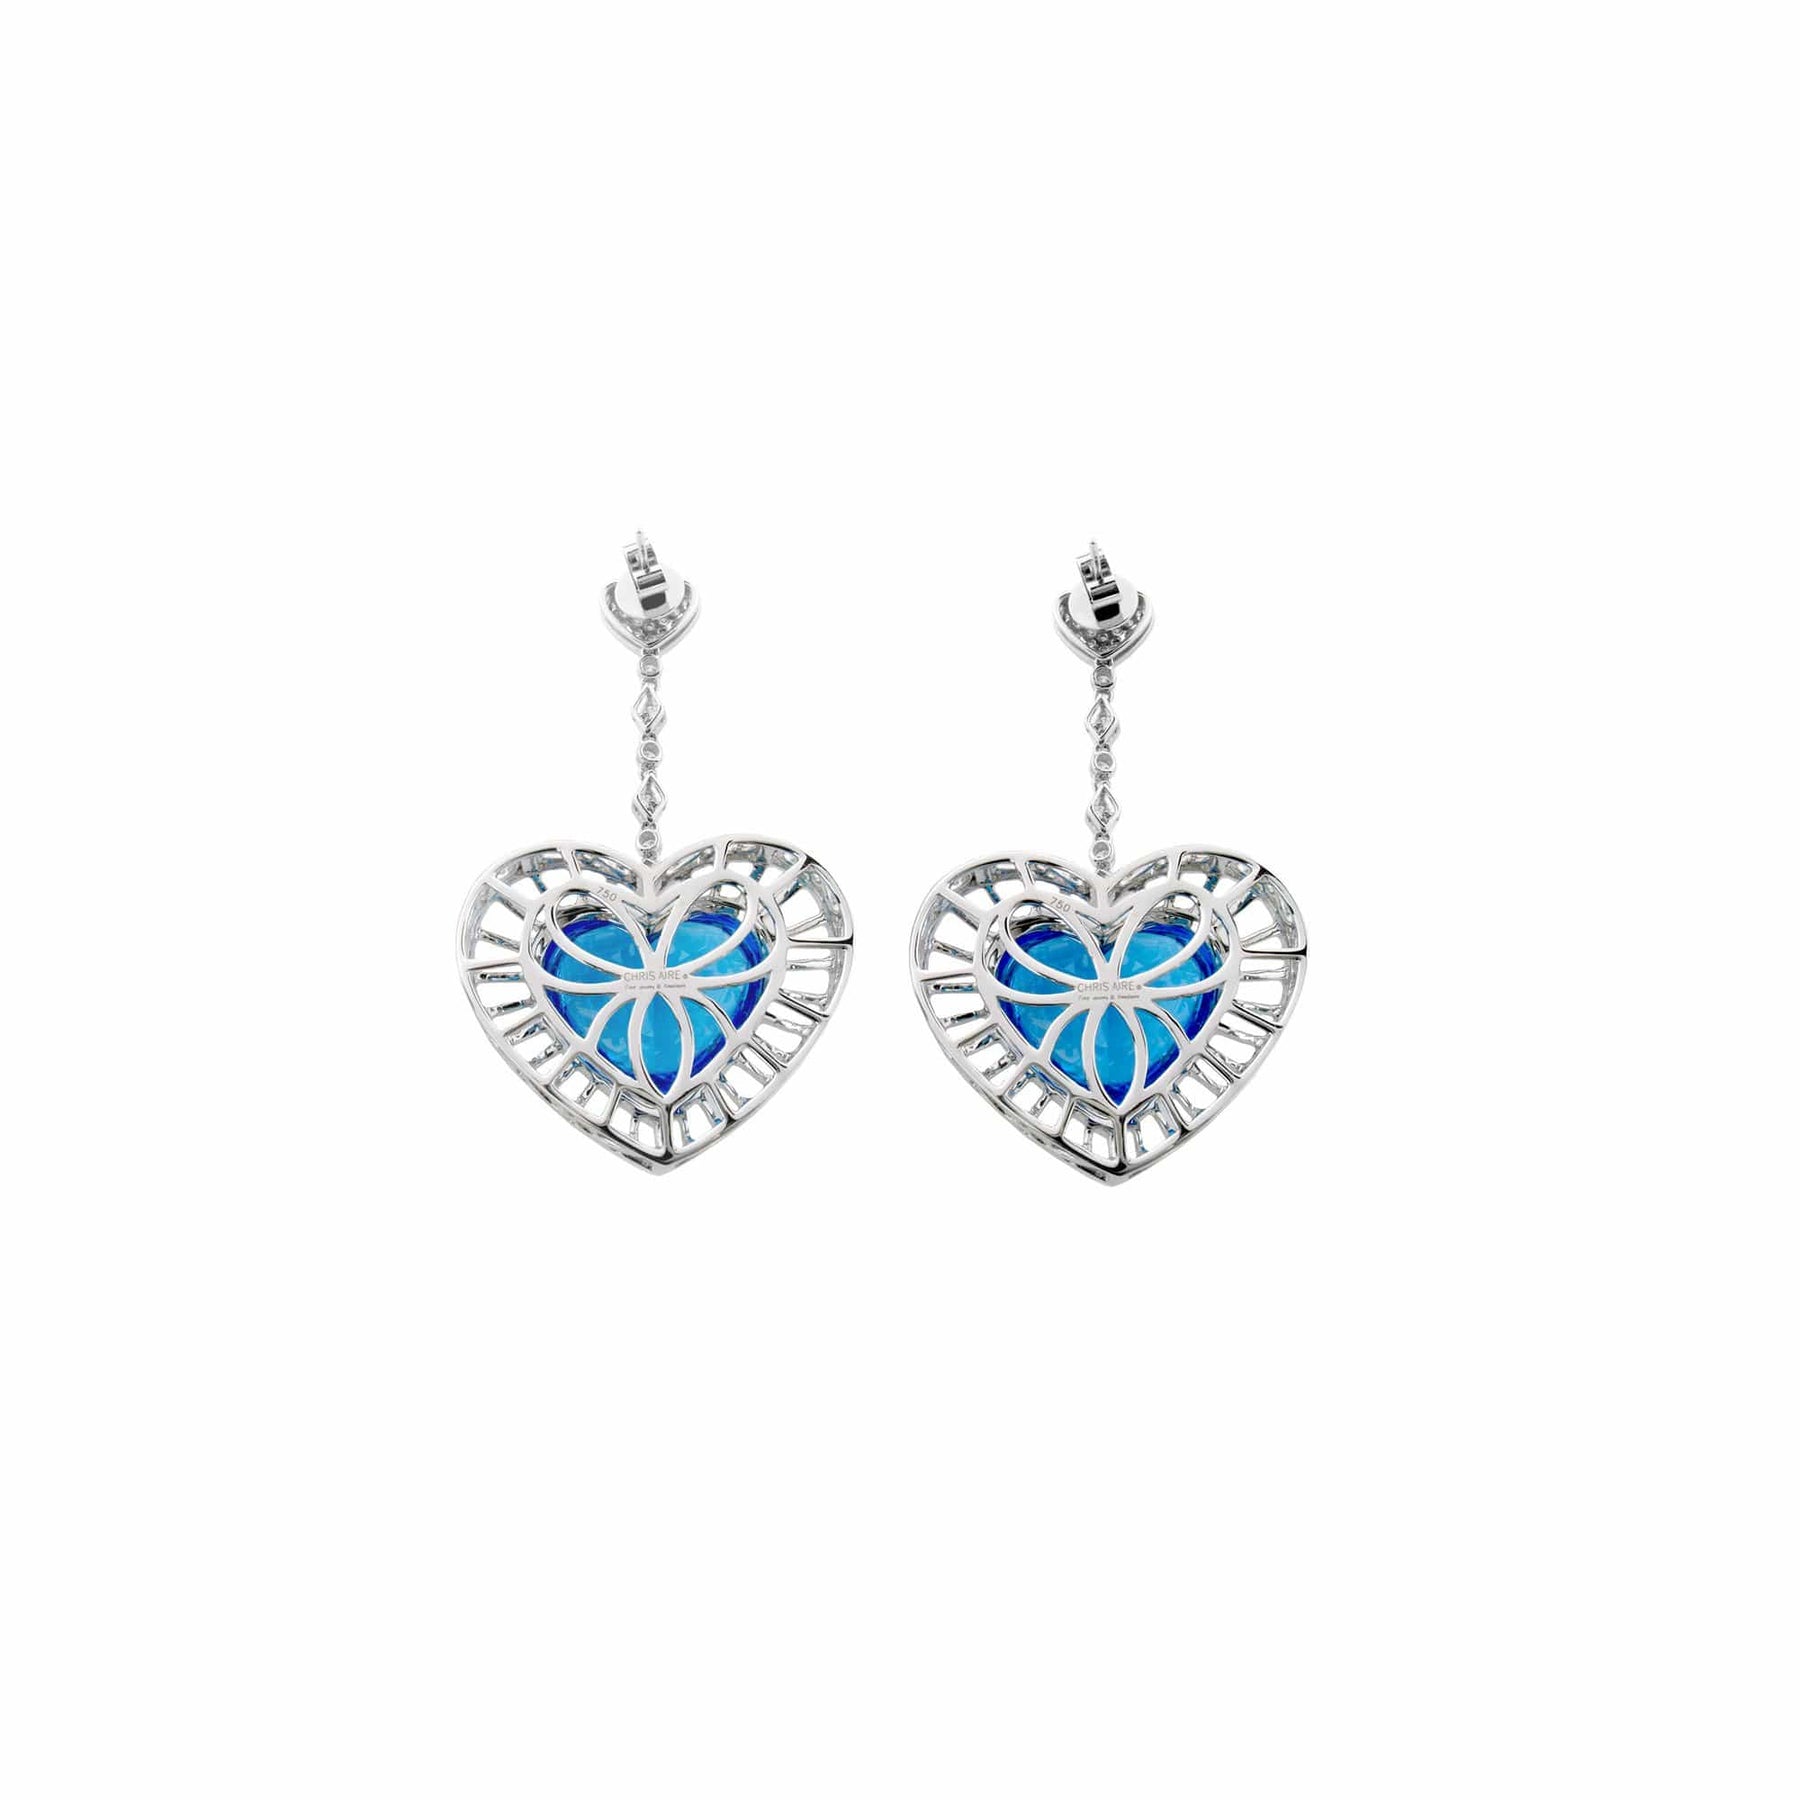 CHRIS AIRE - EARRINGS - Chris Aire Fine Jewelry & Timepieces